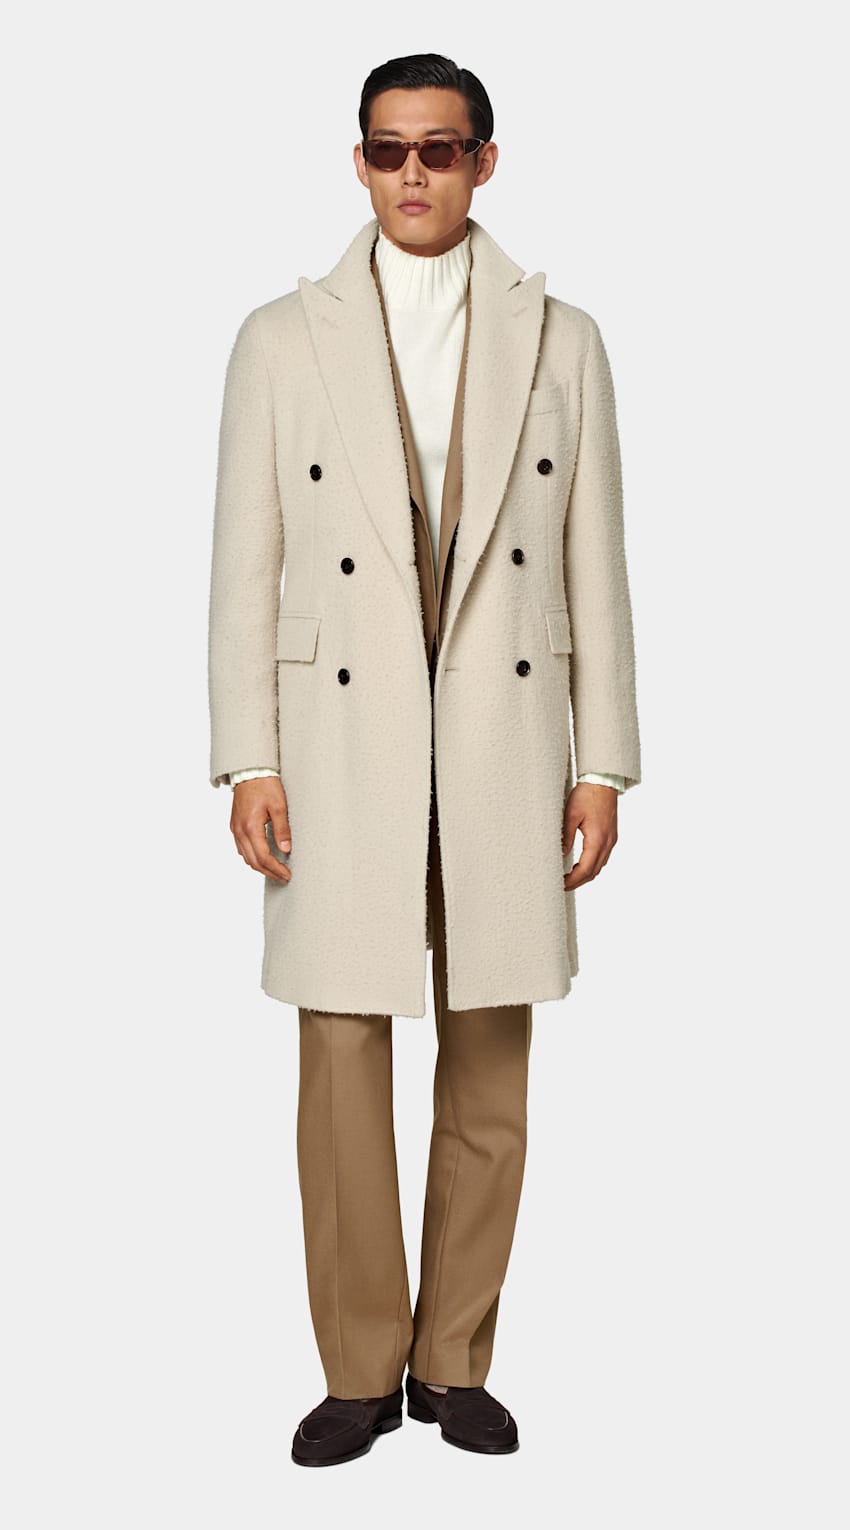 SUITSUPPLY Pure Casentino Wool by Casentino, Italy Light Brown Overcoat